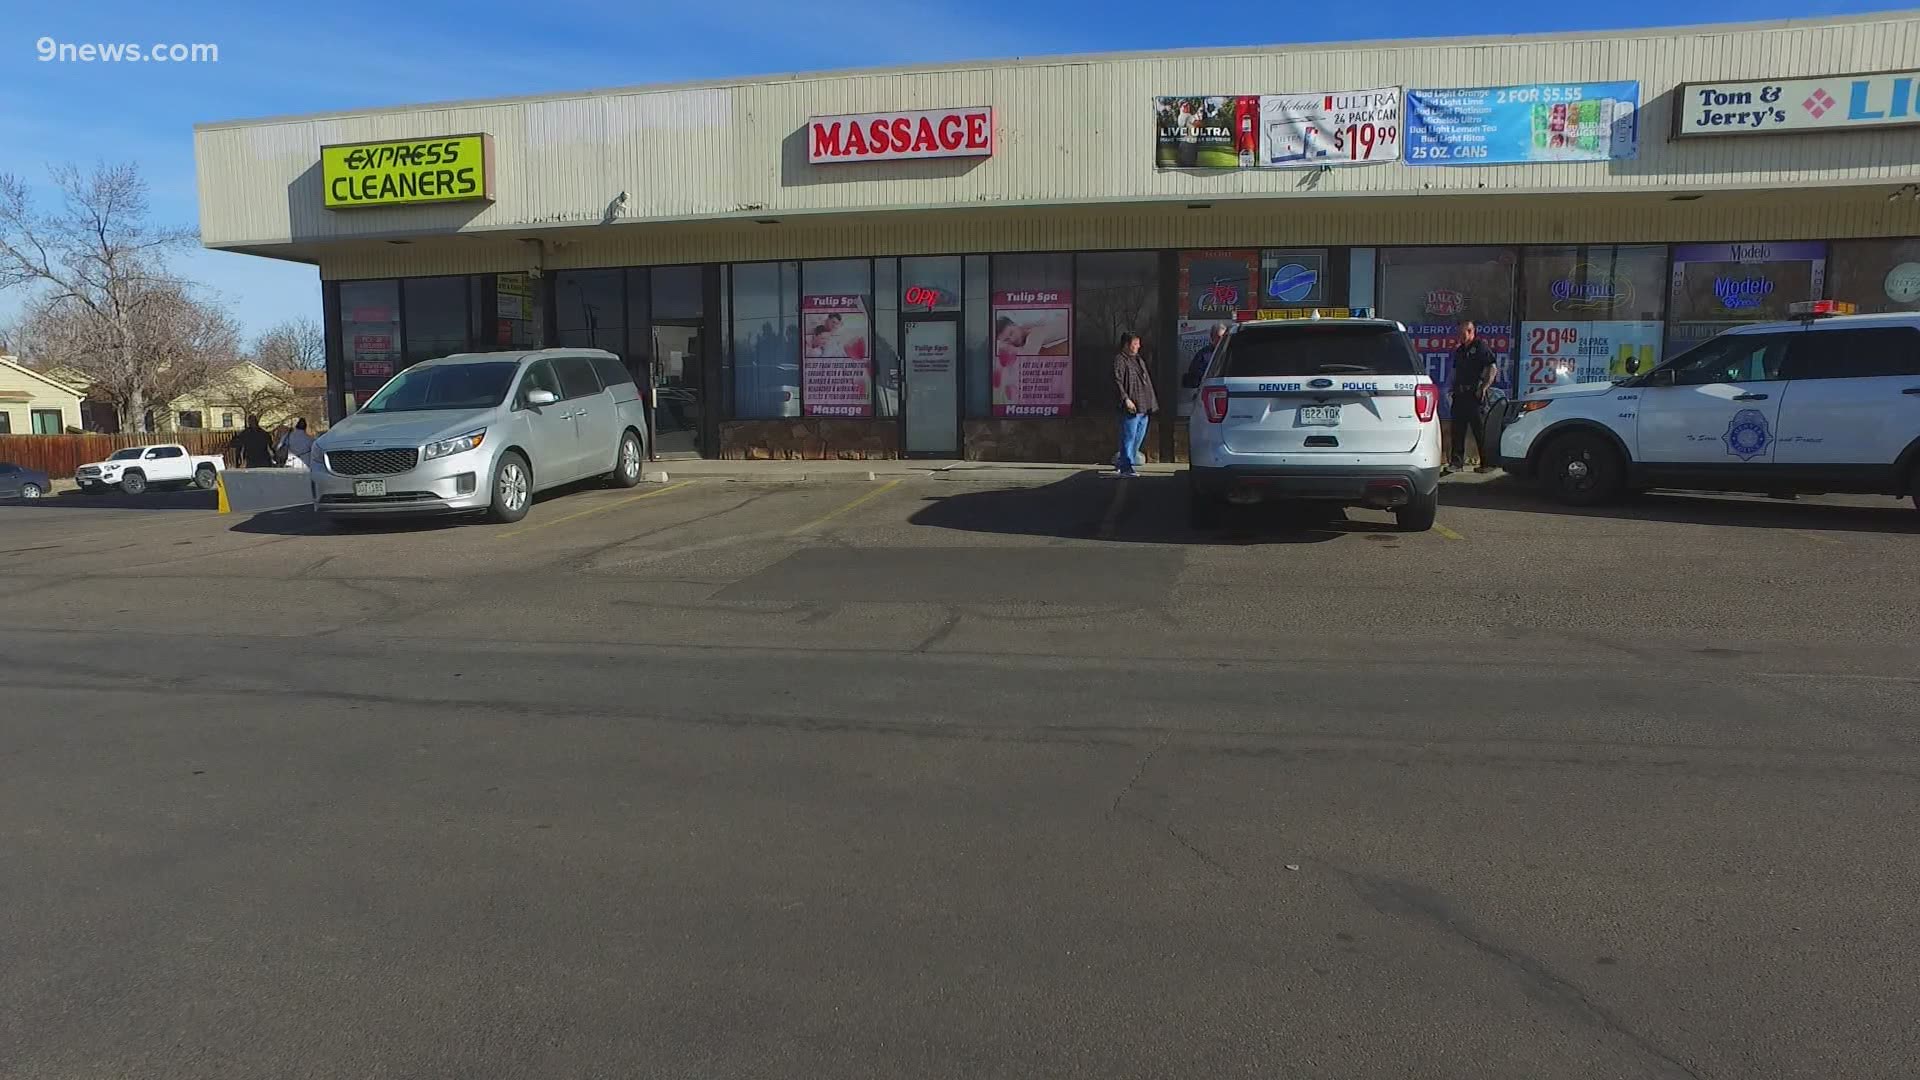 The legislation was passed two years after a 9Wants to Know investigation found suspected illicit massage businesses moved from Aurora to Denver.